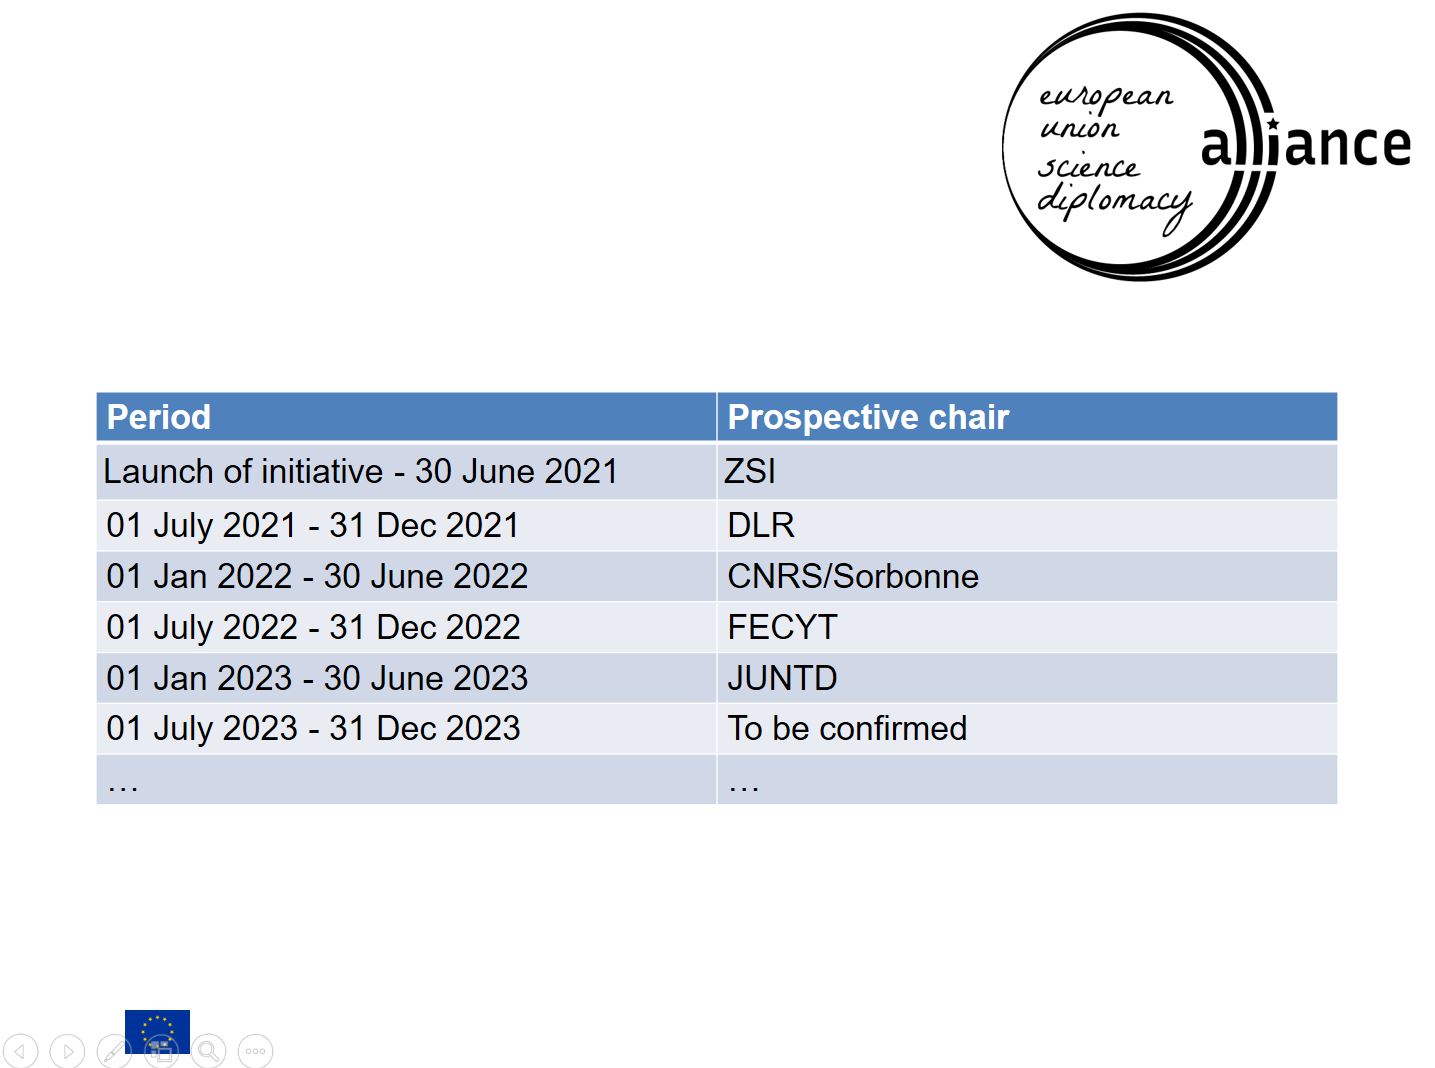 Rotating chairs of the EU SD Alliance 2021-2023